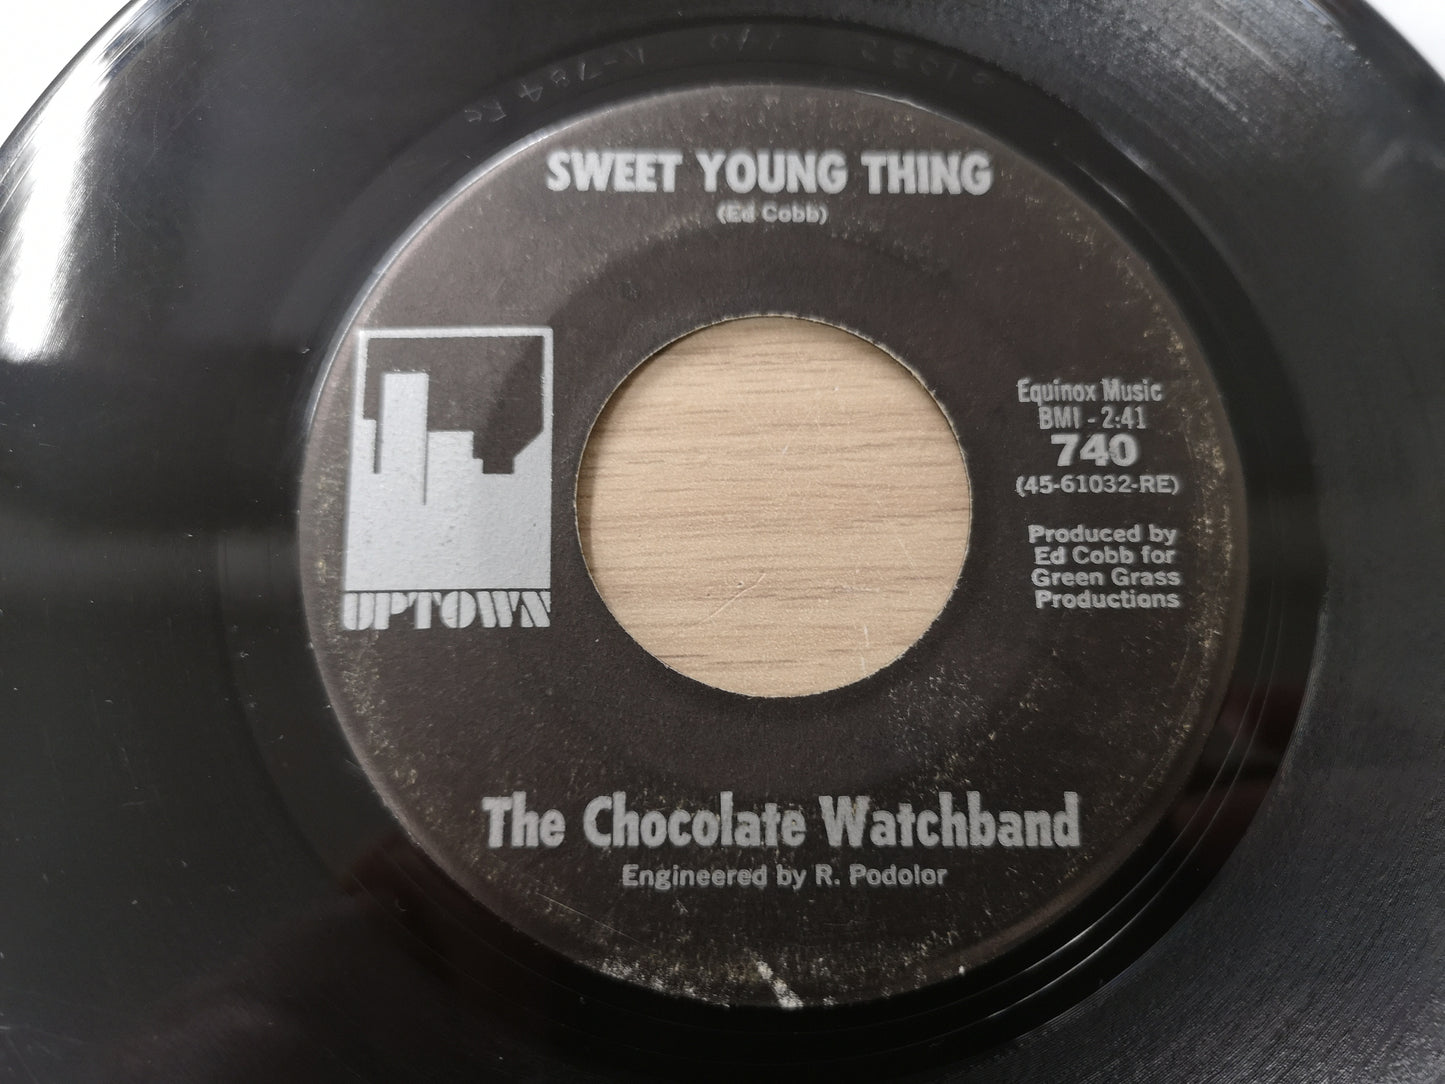 Chocolate Watchband "Sweet Young Thing" Orig US 1966 VG++